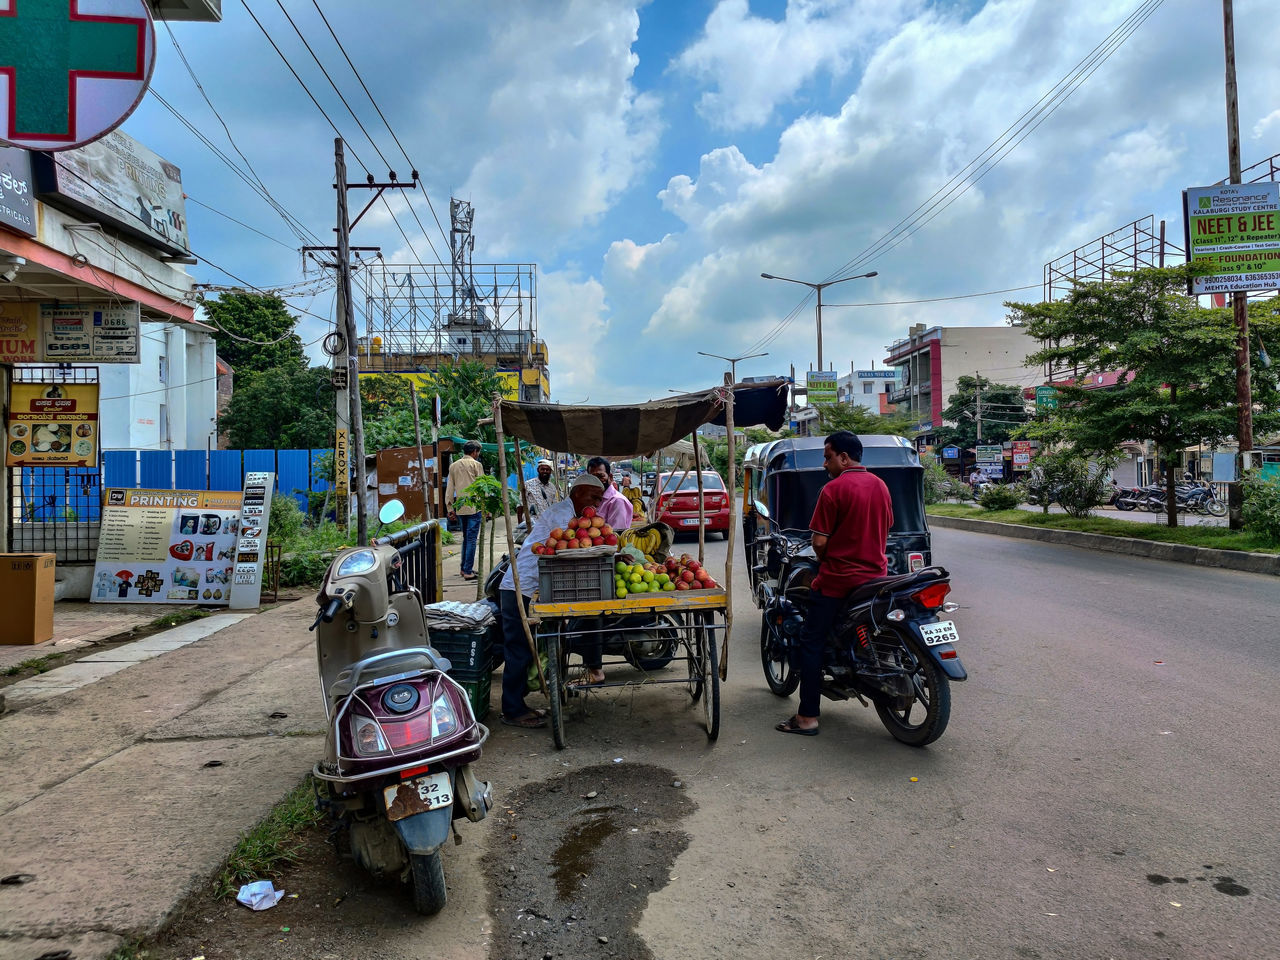 transportation, city, mode of transportation, street, architecture, rickshaw, cloud, road, sky, building exterior, motorcycle, urban area, built structure, city street, nature, travel, vehicle, city life, jinrikisha, town, land vehicle, travel destinations, traffic, outdoors, day, neighbourhood, car, building, group of people, adult, bicycle, tourism, motor vehicle, person, driving, infrastructure, transport